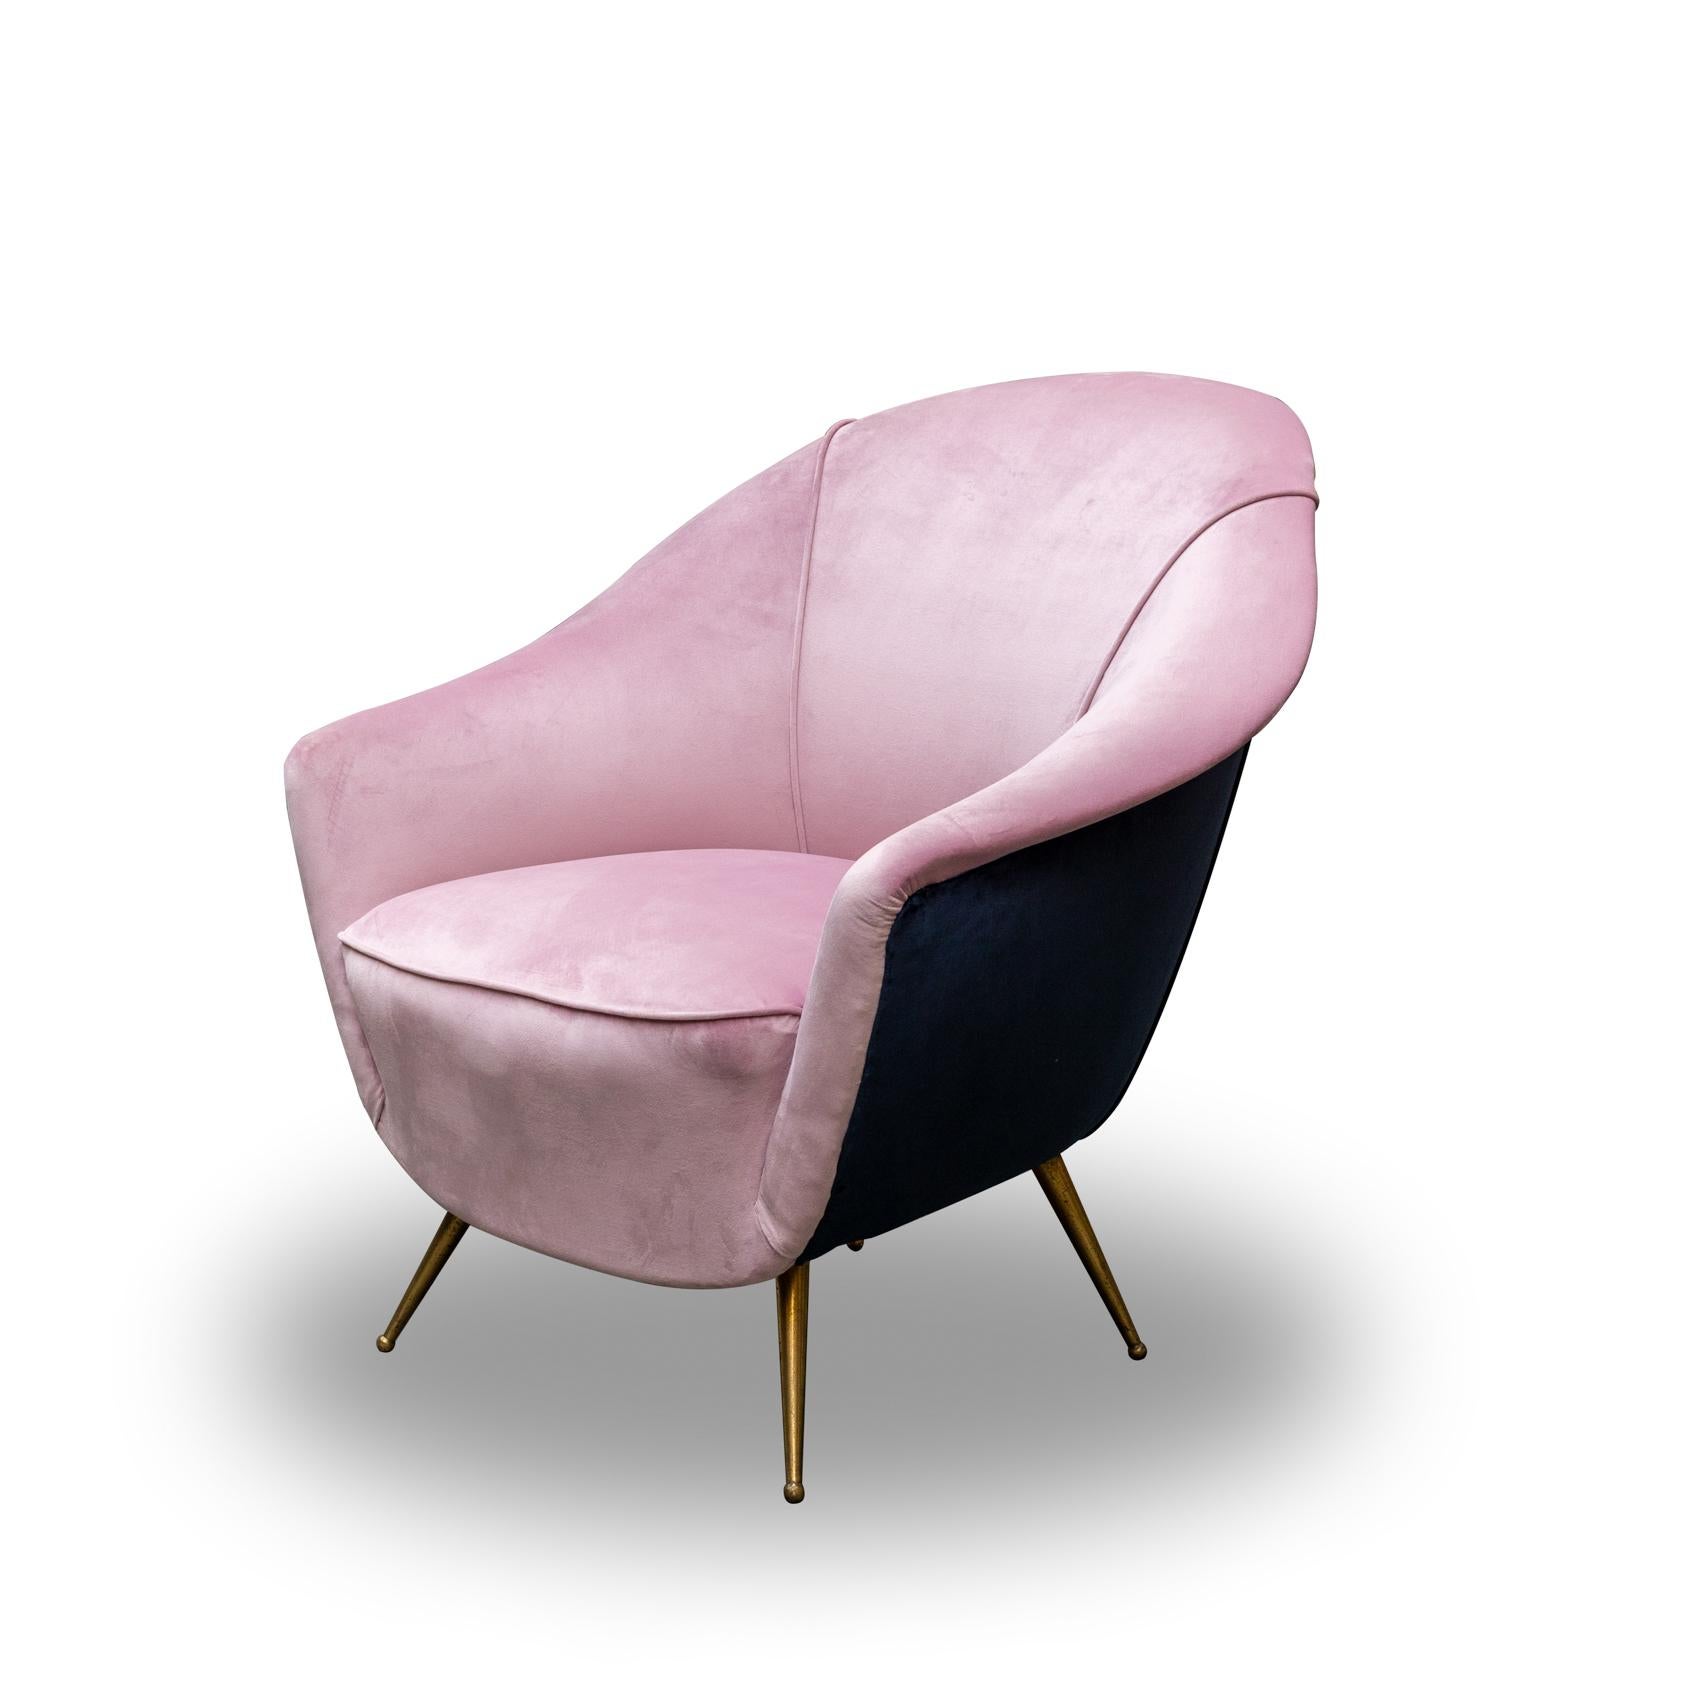 Pair of fobulous Mid-Century Modern armchairs by Ezio Minotti Italy 1955s. Brass Legs and pink and blu velvet .Suitable for any type of environment with their mid -fifties Italian style they give an imprint and decor to the house. The velvet has